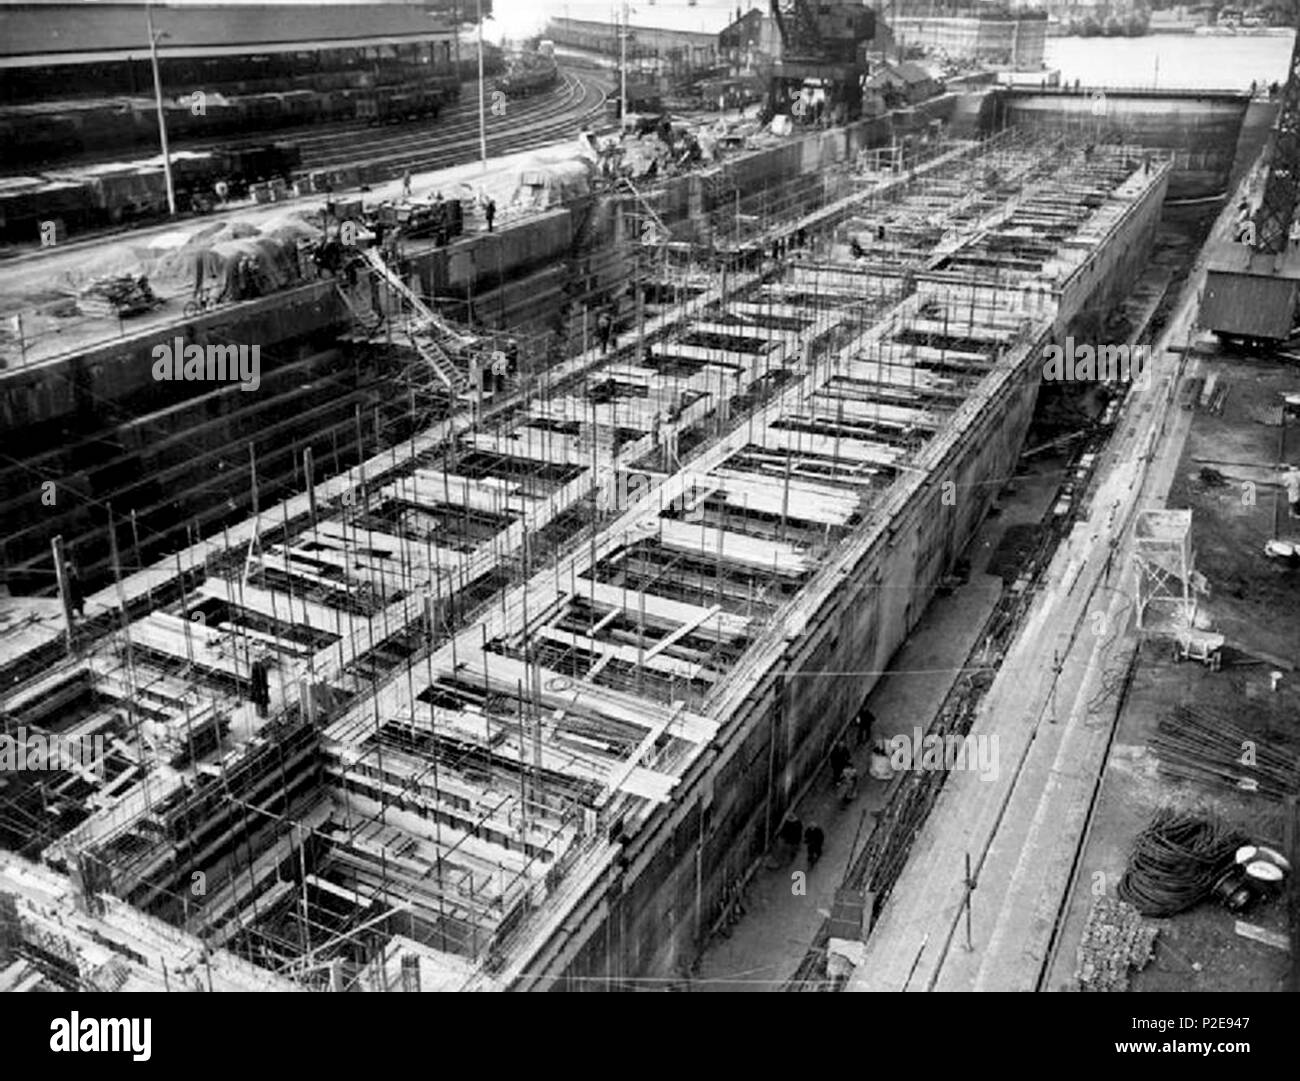 Mulberry Harbours or Phoenix cassions under construction, 1944 Stock Photo